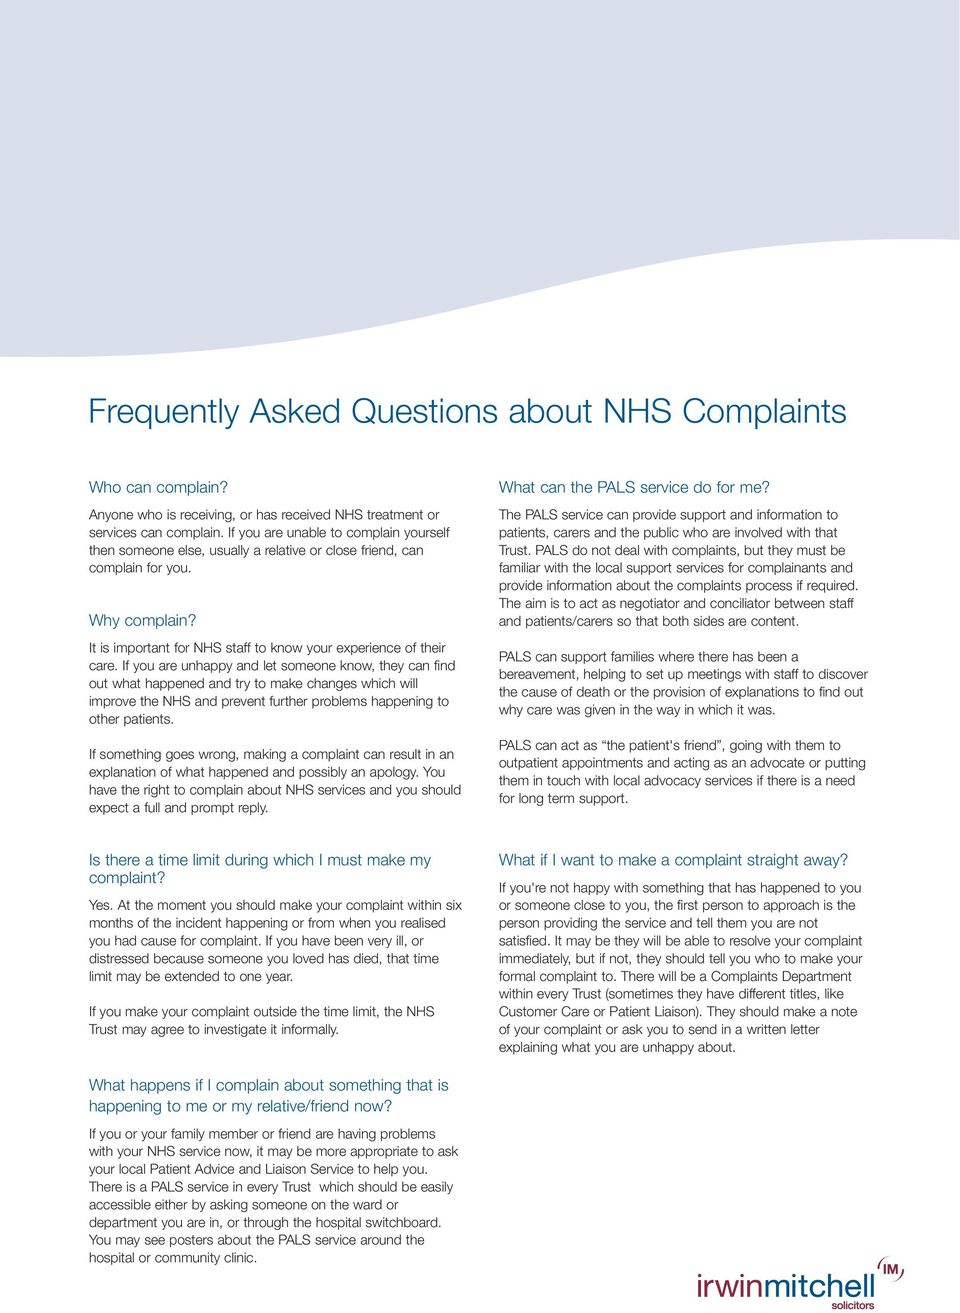 If you are unhappy and let someone know, they can find out what happened and try to make changes which will improve the NHS and prevent further problems happening to other patients.